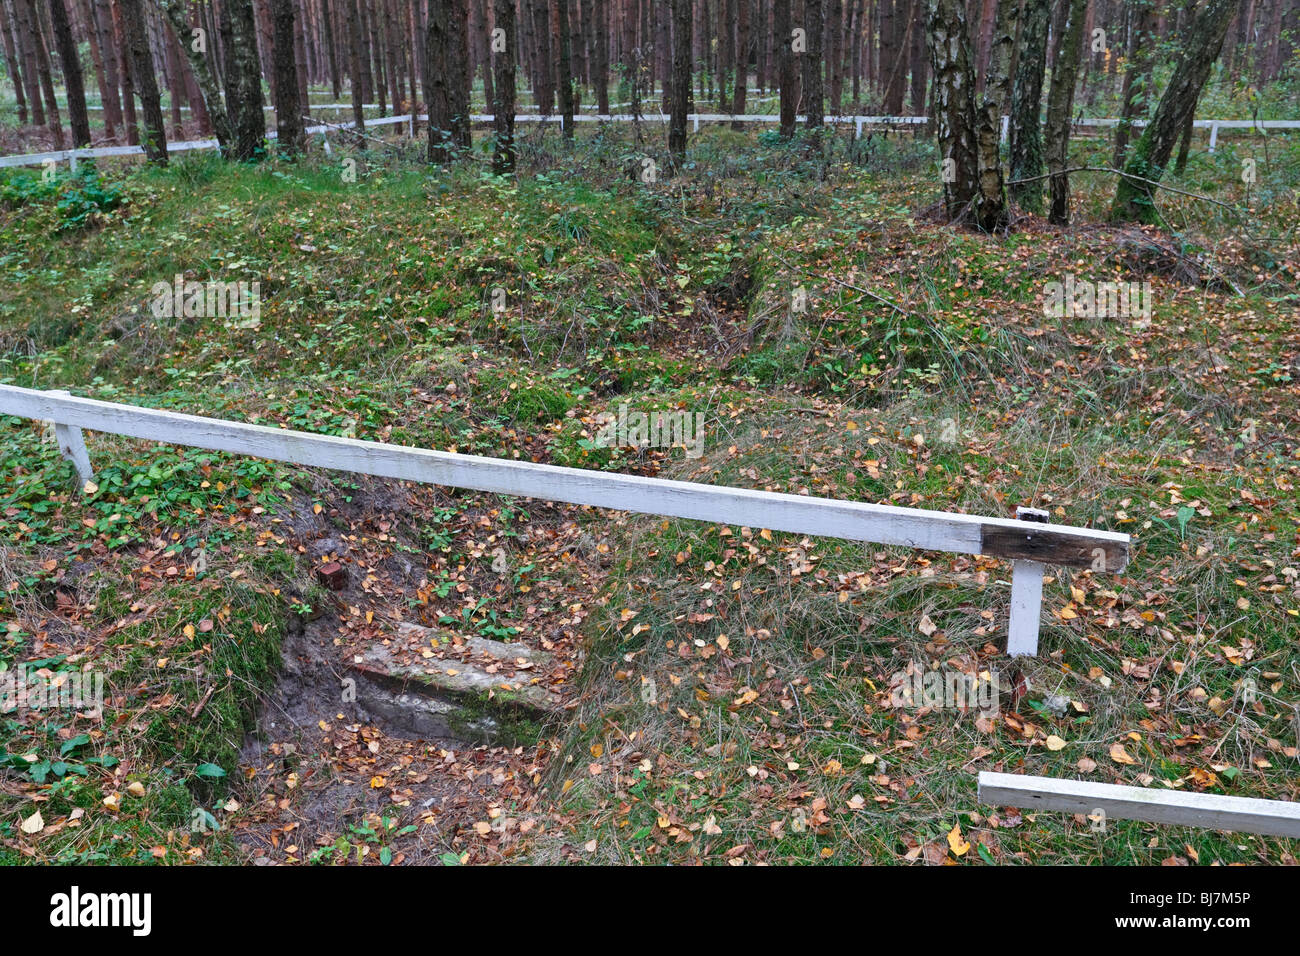 Location of the barracks of the former concentration camp in Wöbbelin, Mecklenburg-West Pomerania, Germany Stock Photo